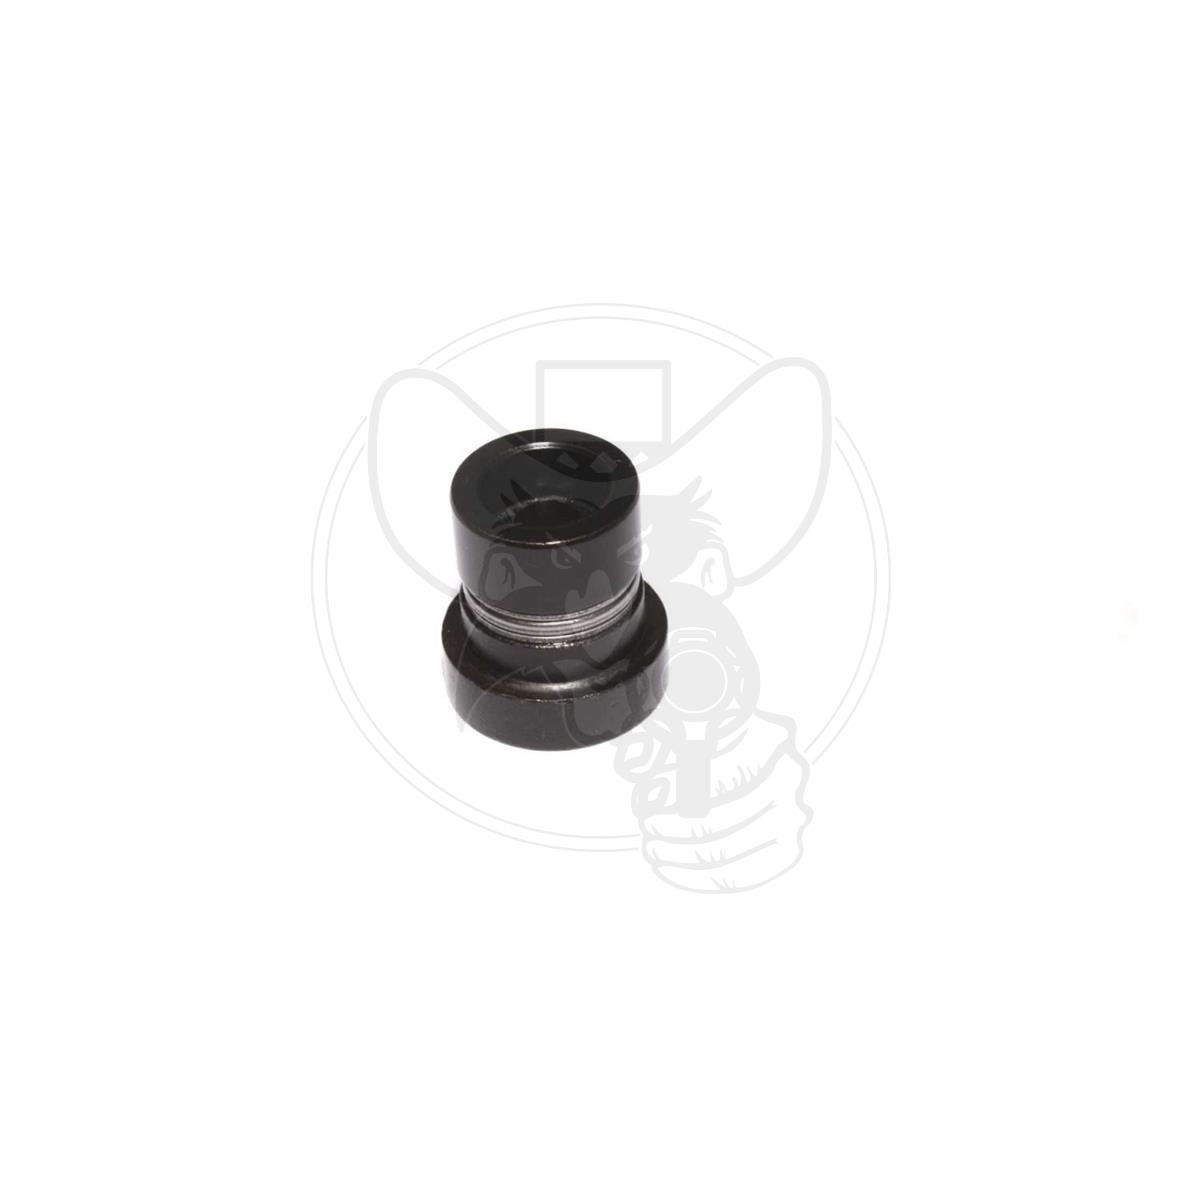 COMP CAMS CAMSHAFT ROLLER THRUST BUTTON .945" FITS BIG BLOCK CHEV